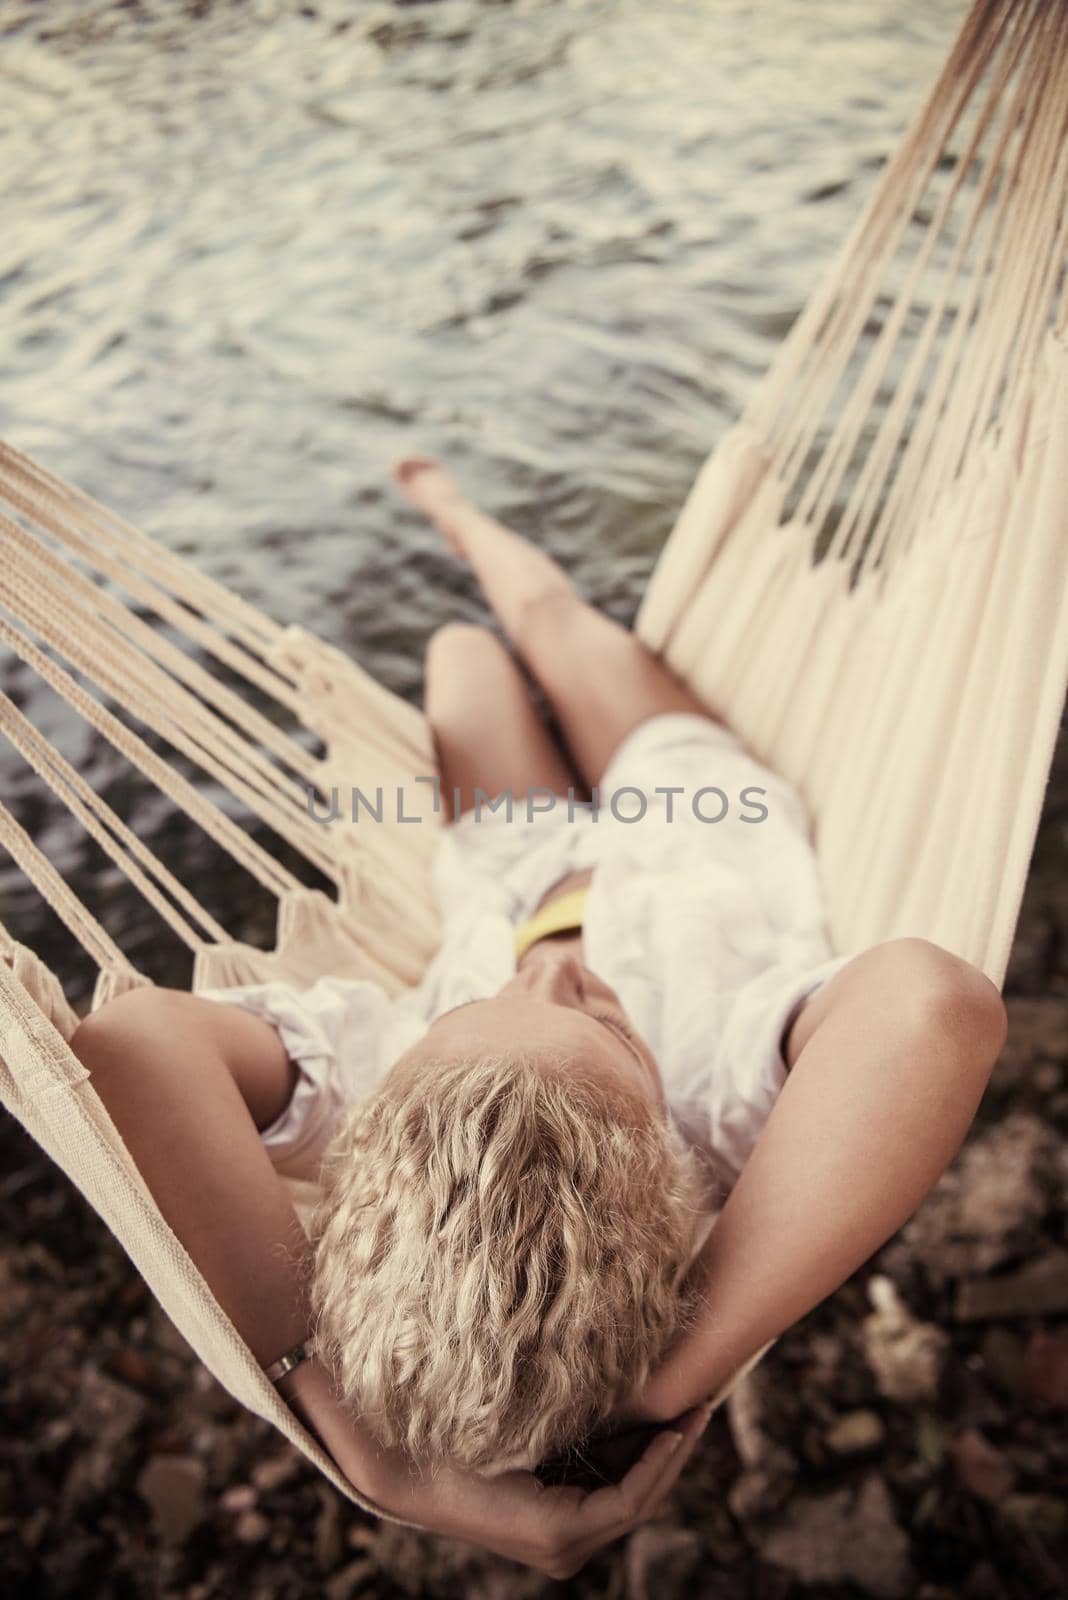 Young blonde woman resting on hammock while enjoying nature on the river bank